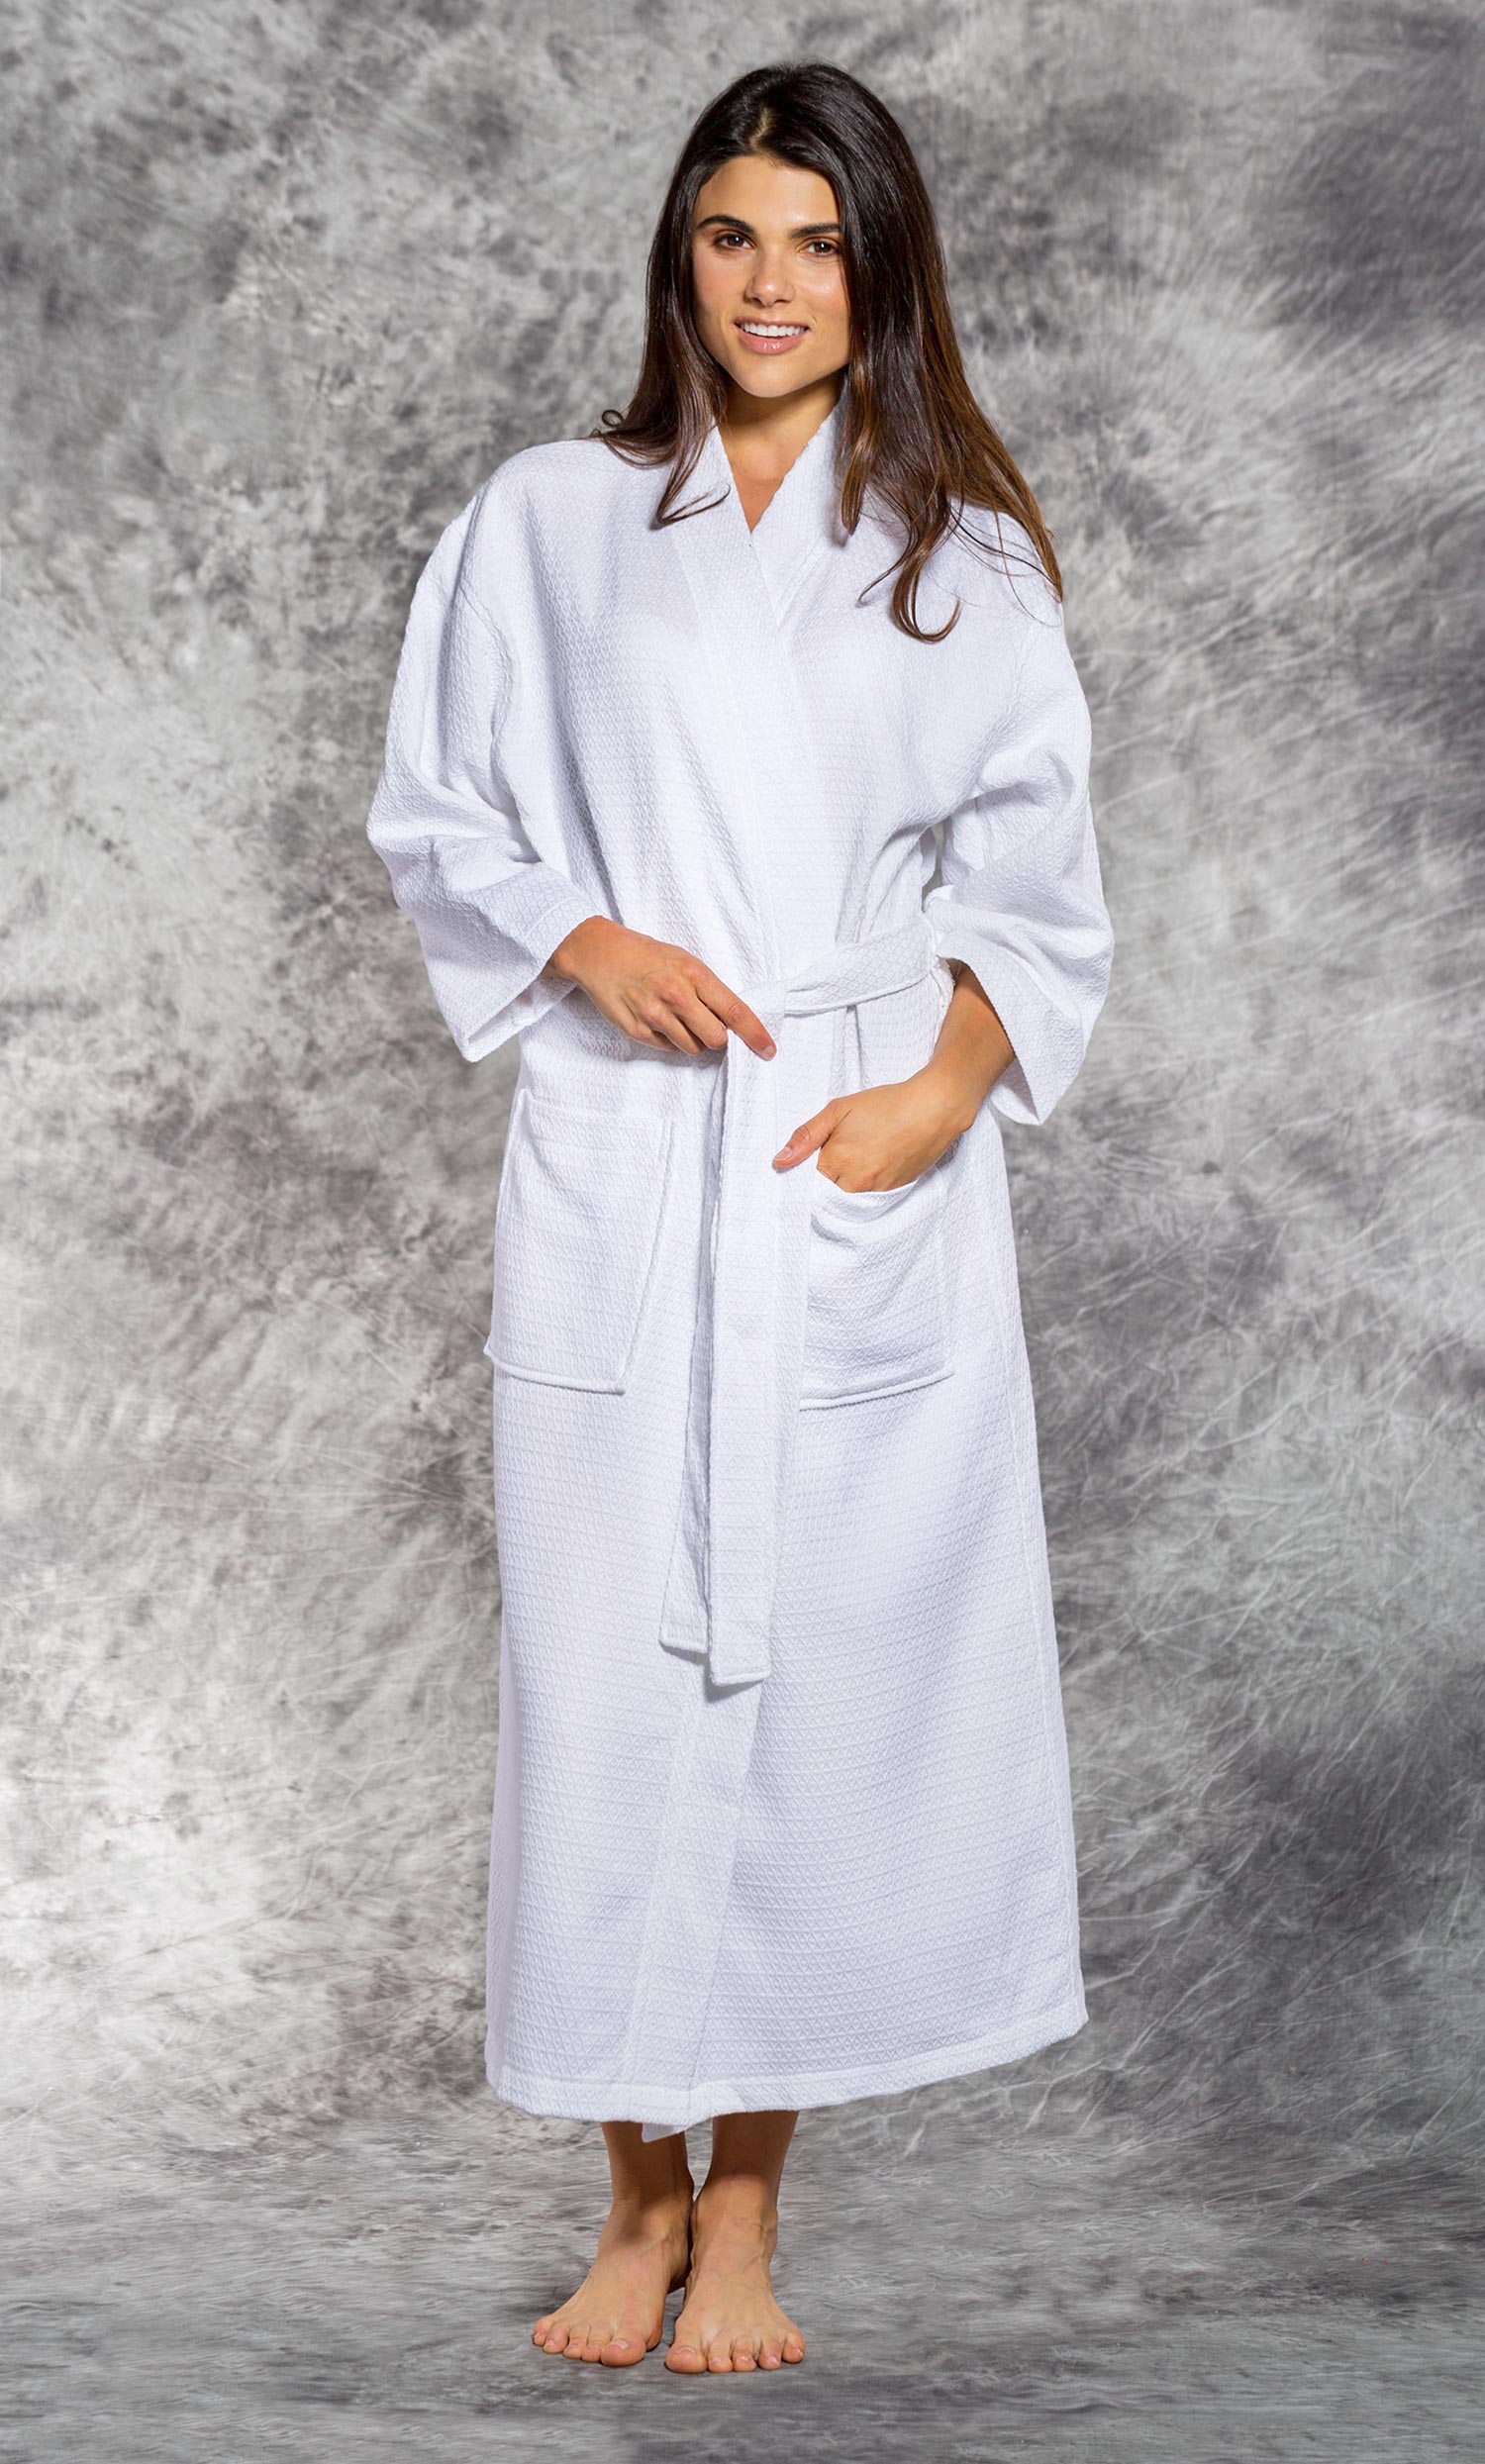 Quickly Least blue whale Economy Bathrobes :: Full Length Waffle Robes :: NEW! 100% Turkish Cotton  White Waffle Kimono Robe - Turquaz Linen, Towels, Robes, Linen and More!